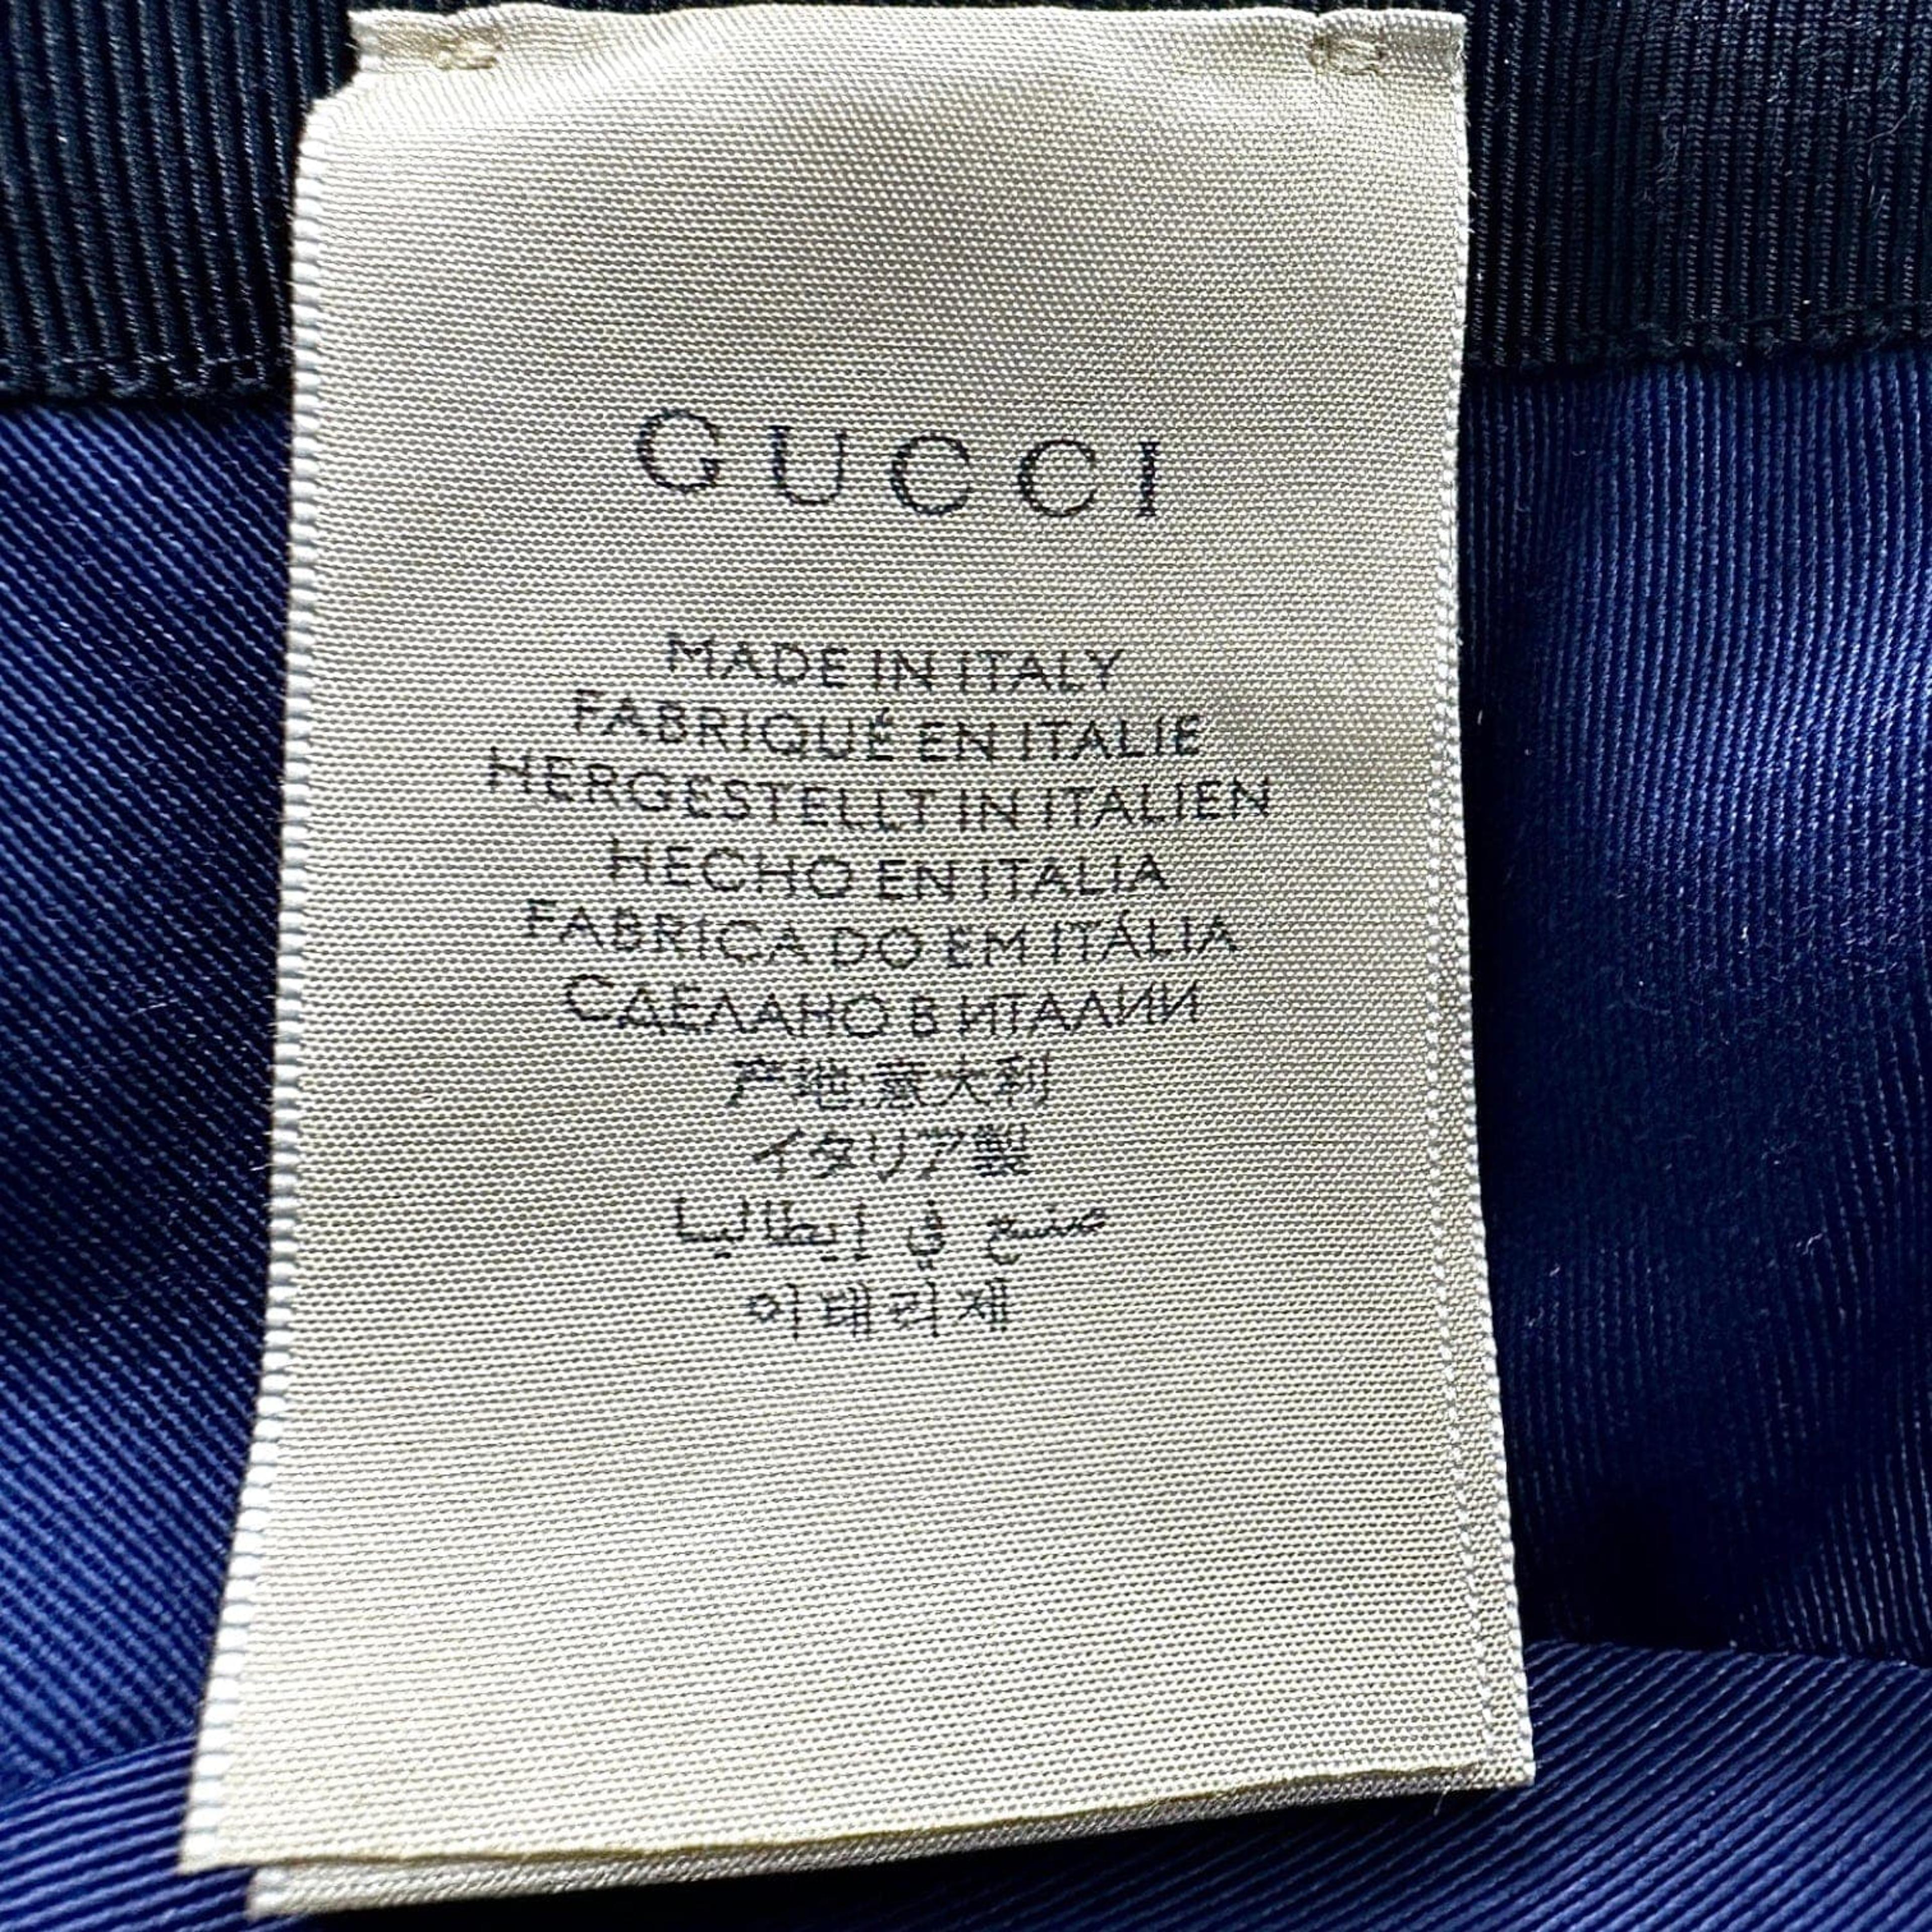 Alternate View 7 of Gucci GG Multicolor Canvas Bucket Hat Blue Black Pre-Owned